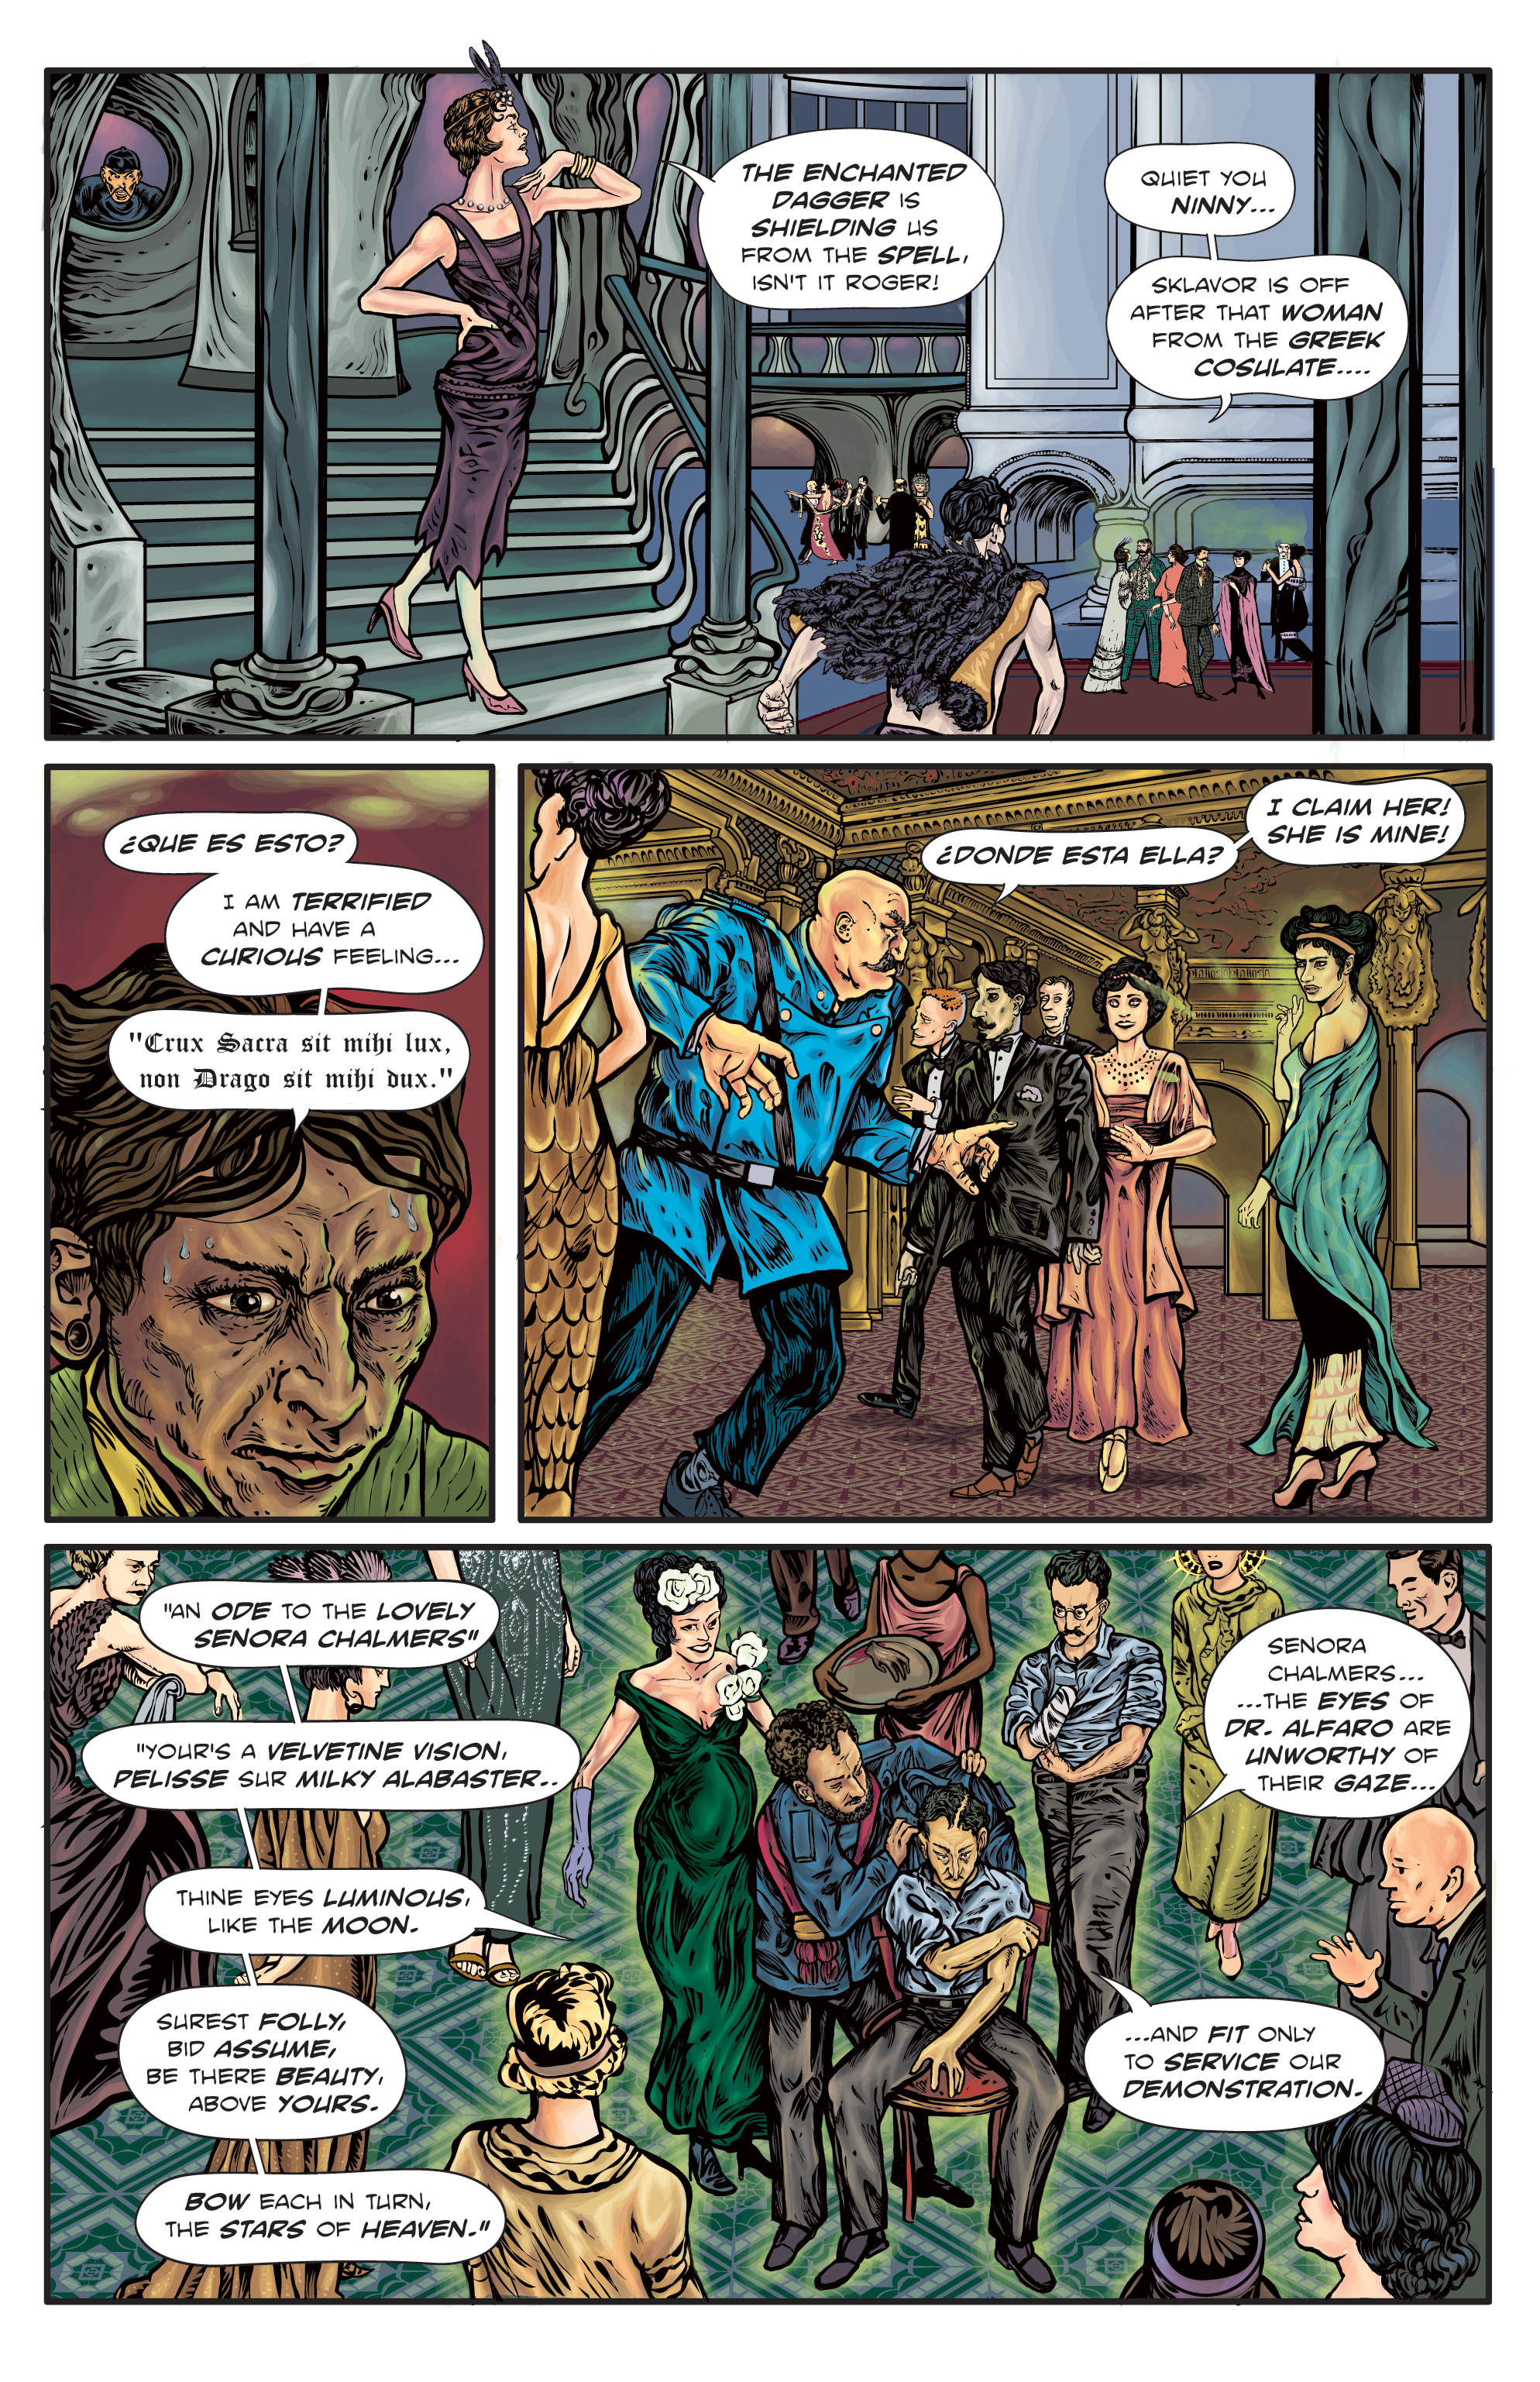 The Enchanted Dagger #4 – Page 13